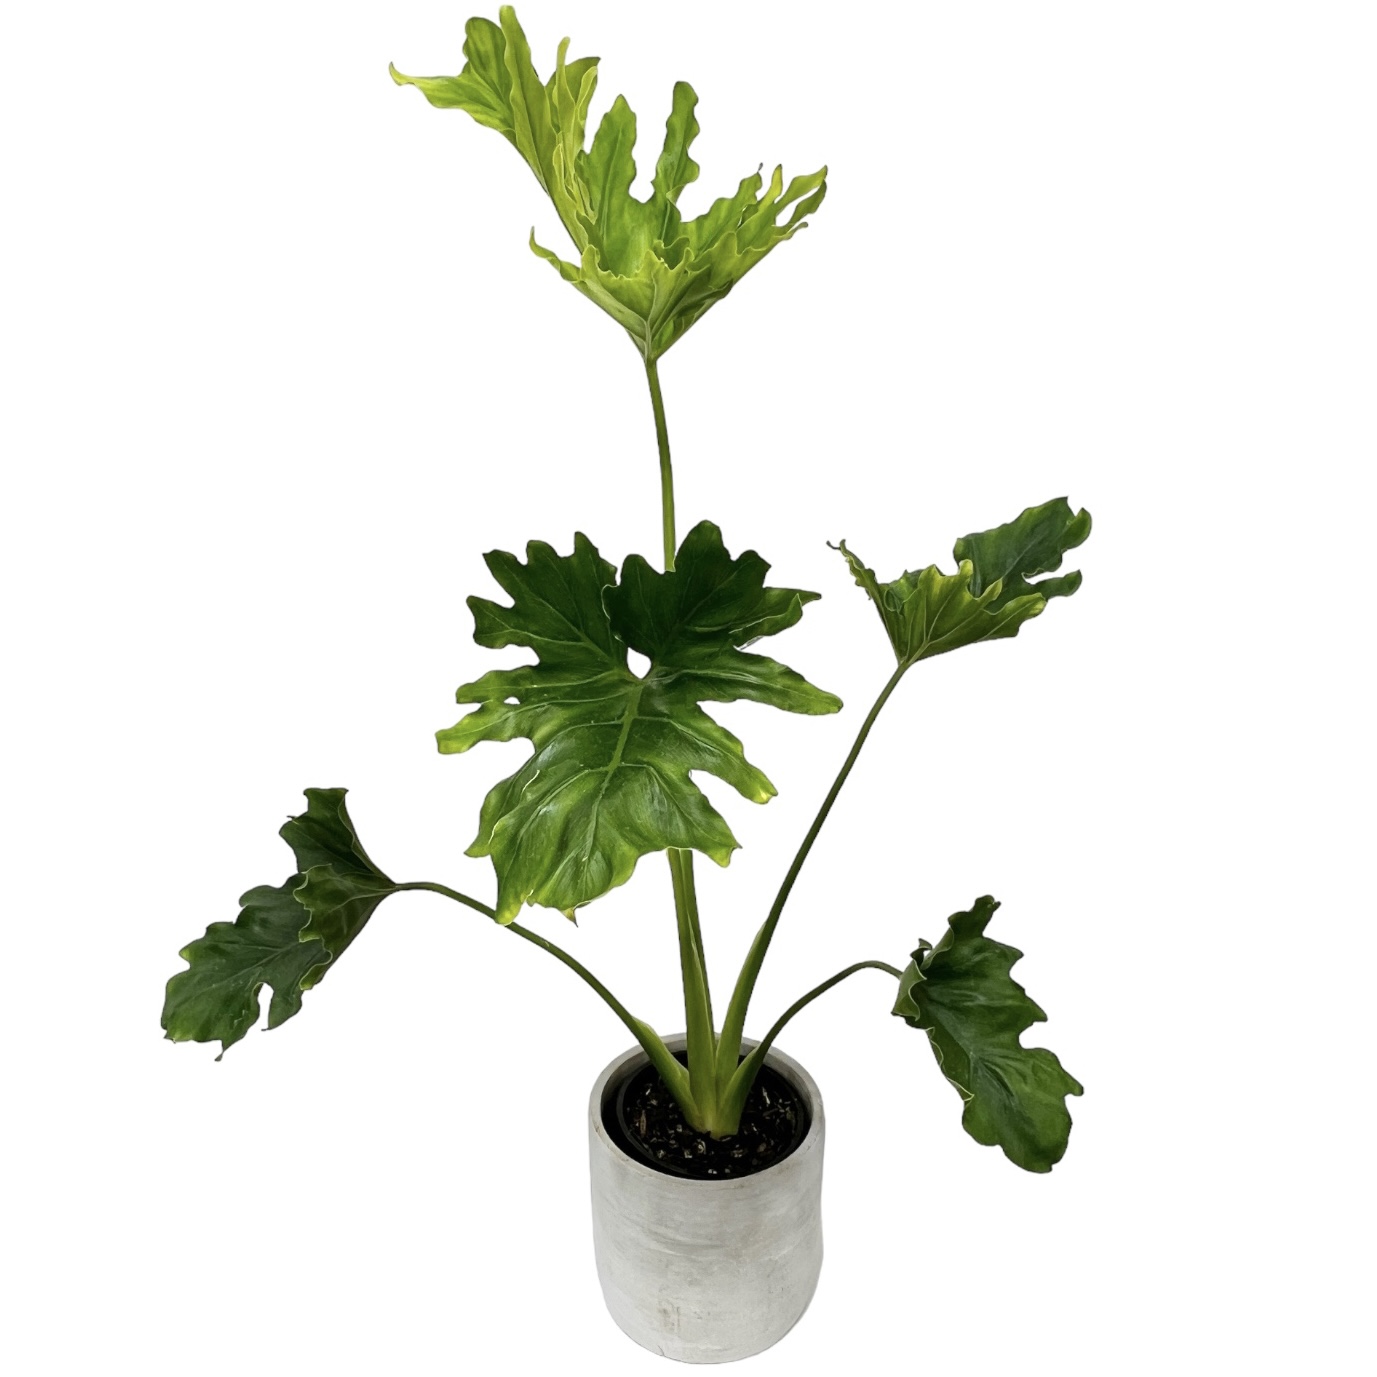 Lush glossy large leaf plant in Pot - Melbourne delivery only